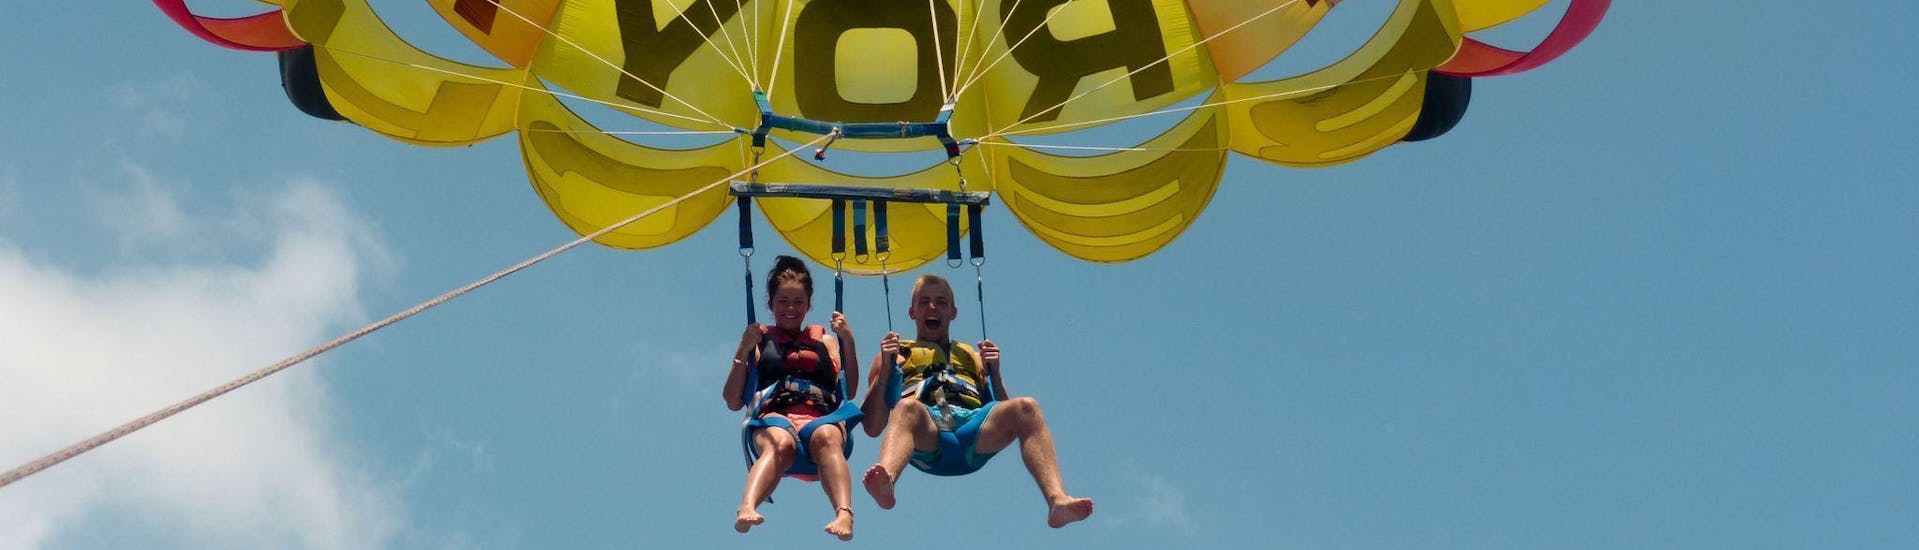 Two people from Watersports Tenerife parasailing in Tenerife .